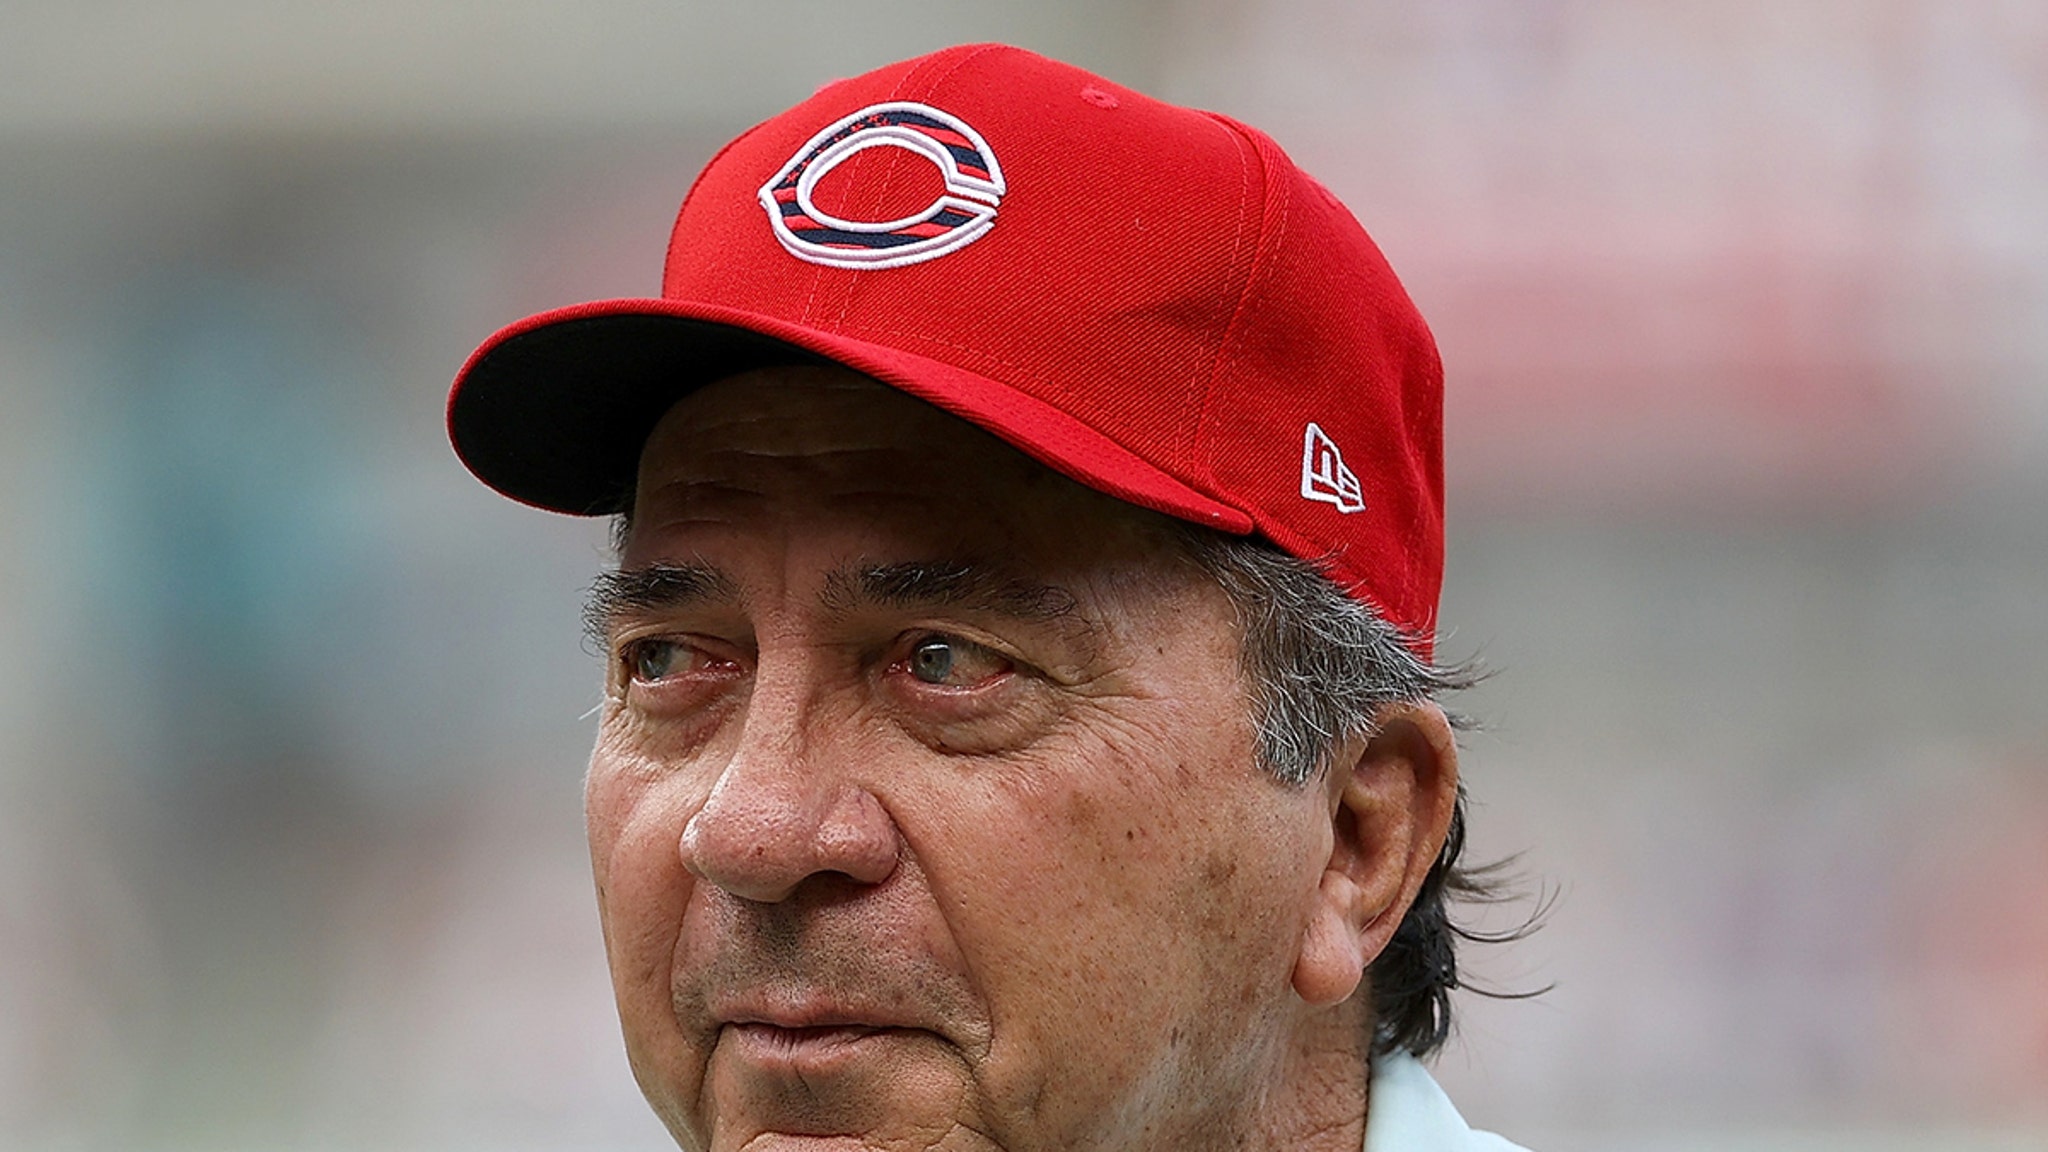 Johnny Bench tests positive for COVID-19, will miss induction weekend